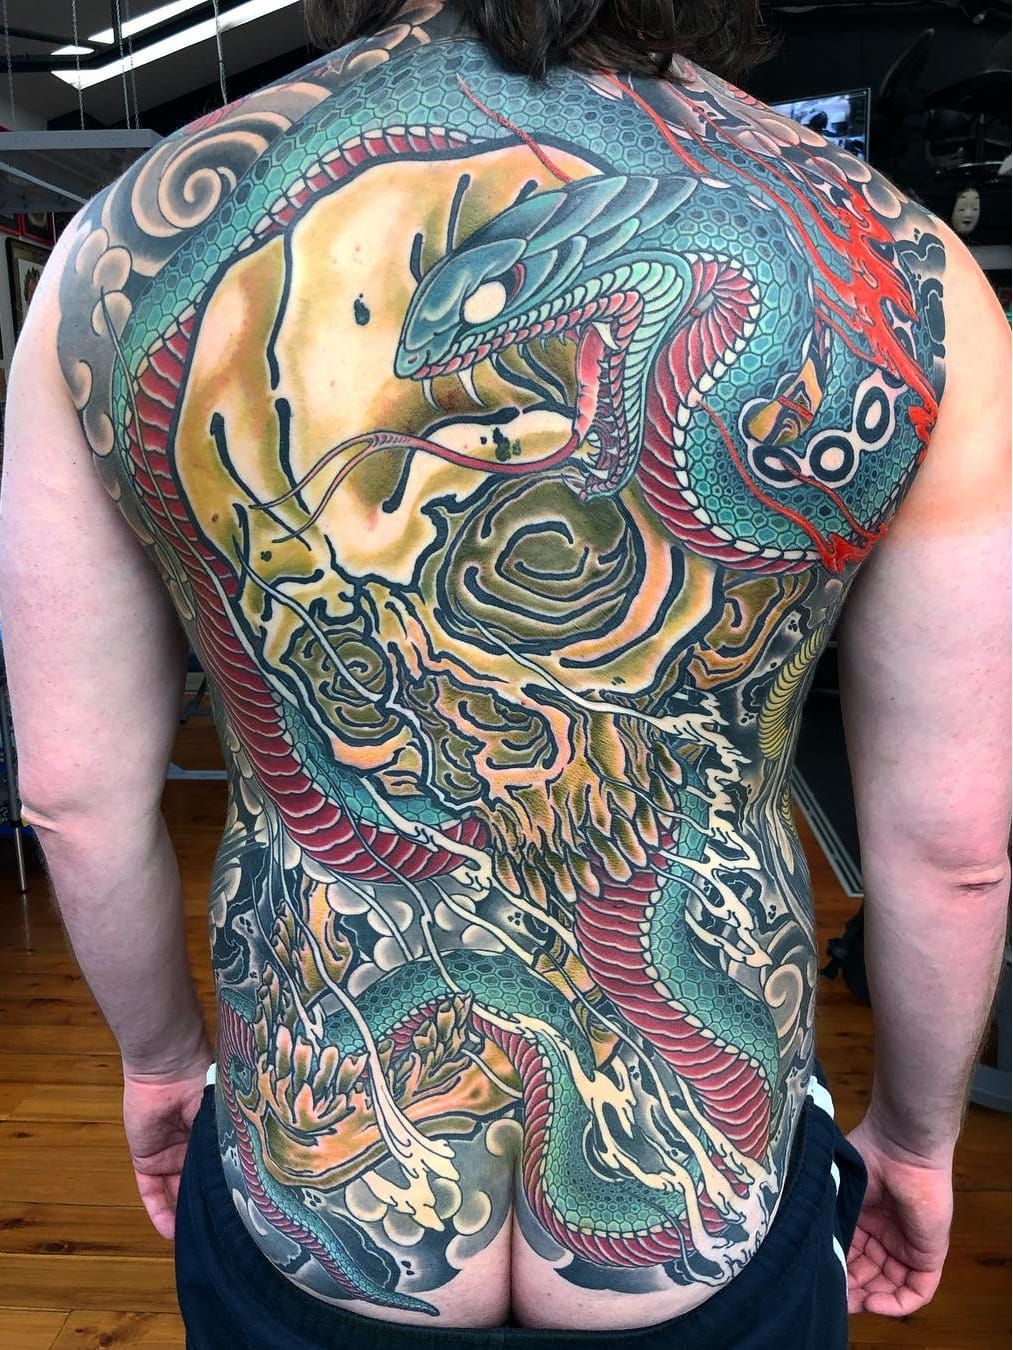 Super colorful Japaneseinspired neotraditional tattoos by  podorovskytattoo Swipe  to see both tattoos and a video irezumi   Instagram